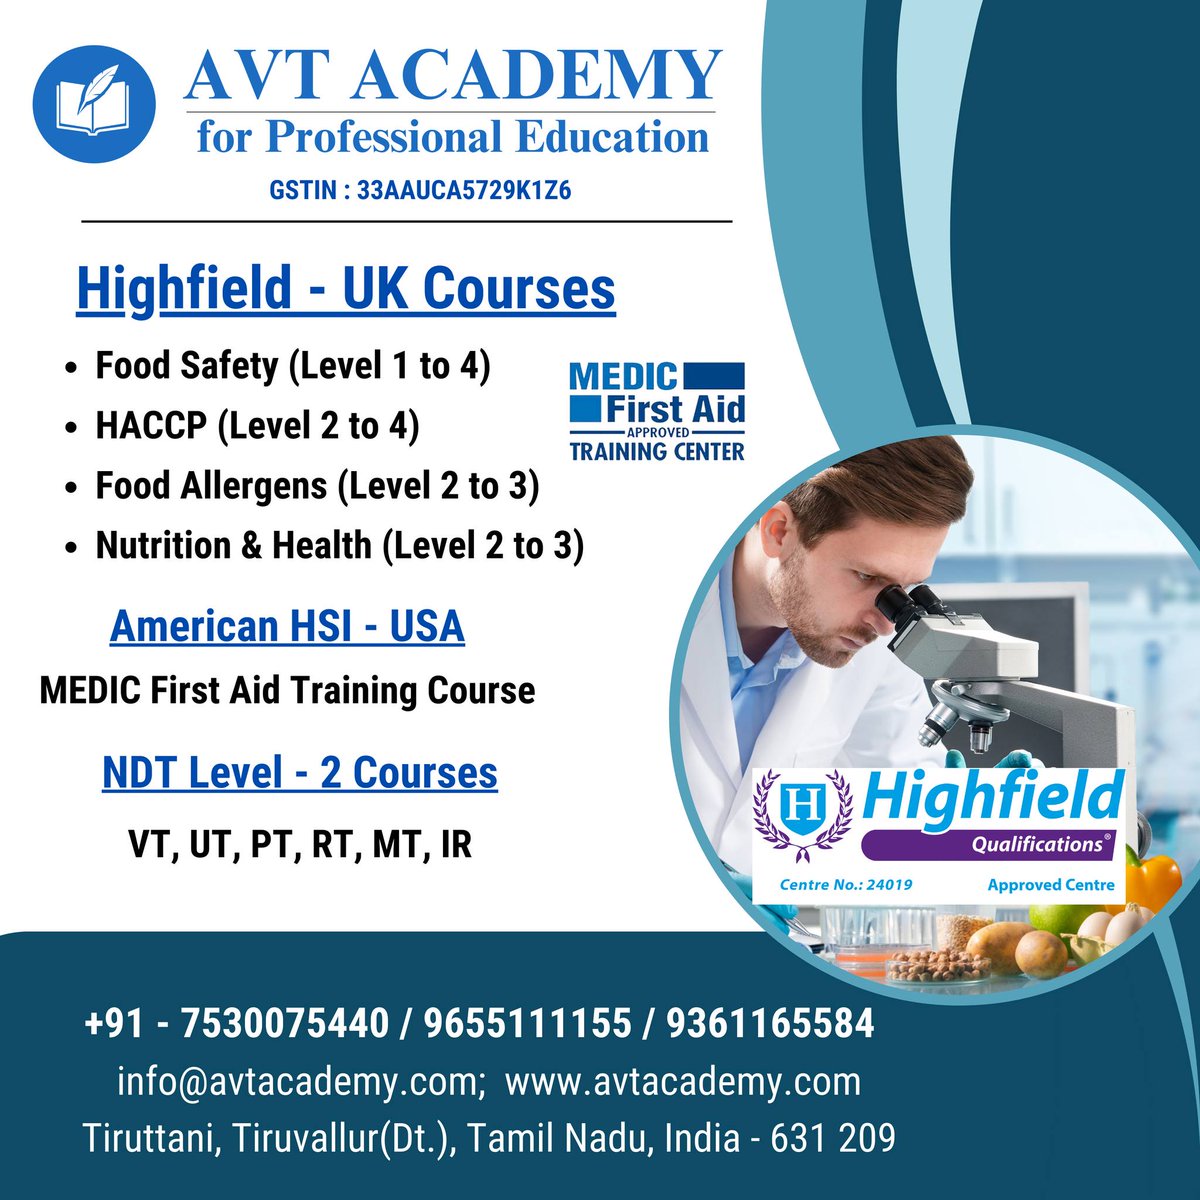 #haccpcertification #ndtcourses #NDT #ndtinspection #ndtinspector #nutrition #nutritionist #nutritionistapproved #nutritiontechnology #nutritionscience #nutritionscientist #foodallergylife #foodallergyfamily #foodallergy #foodsafetycourse